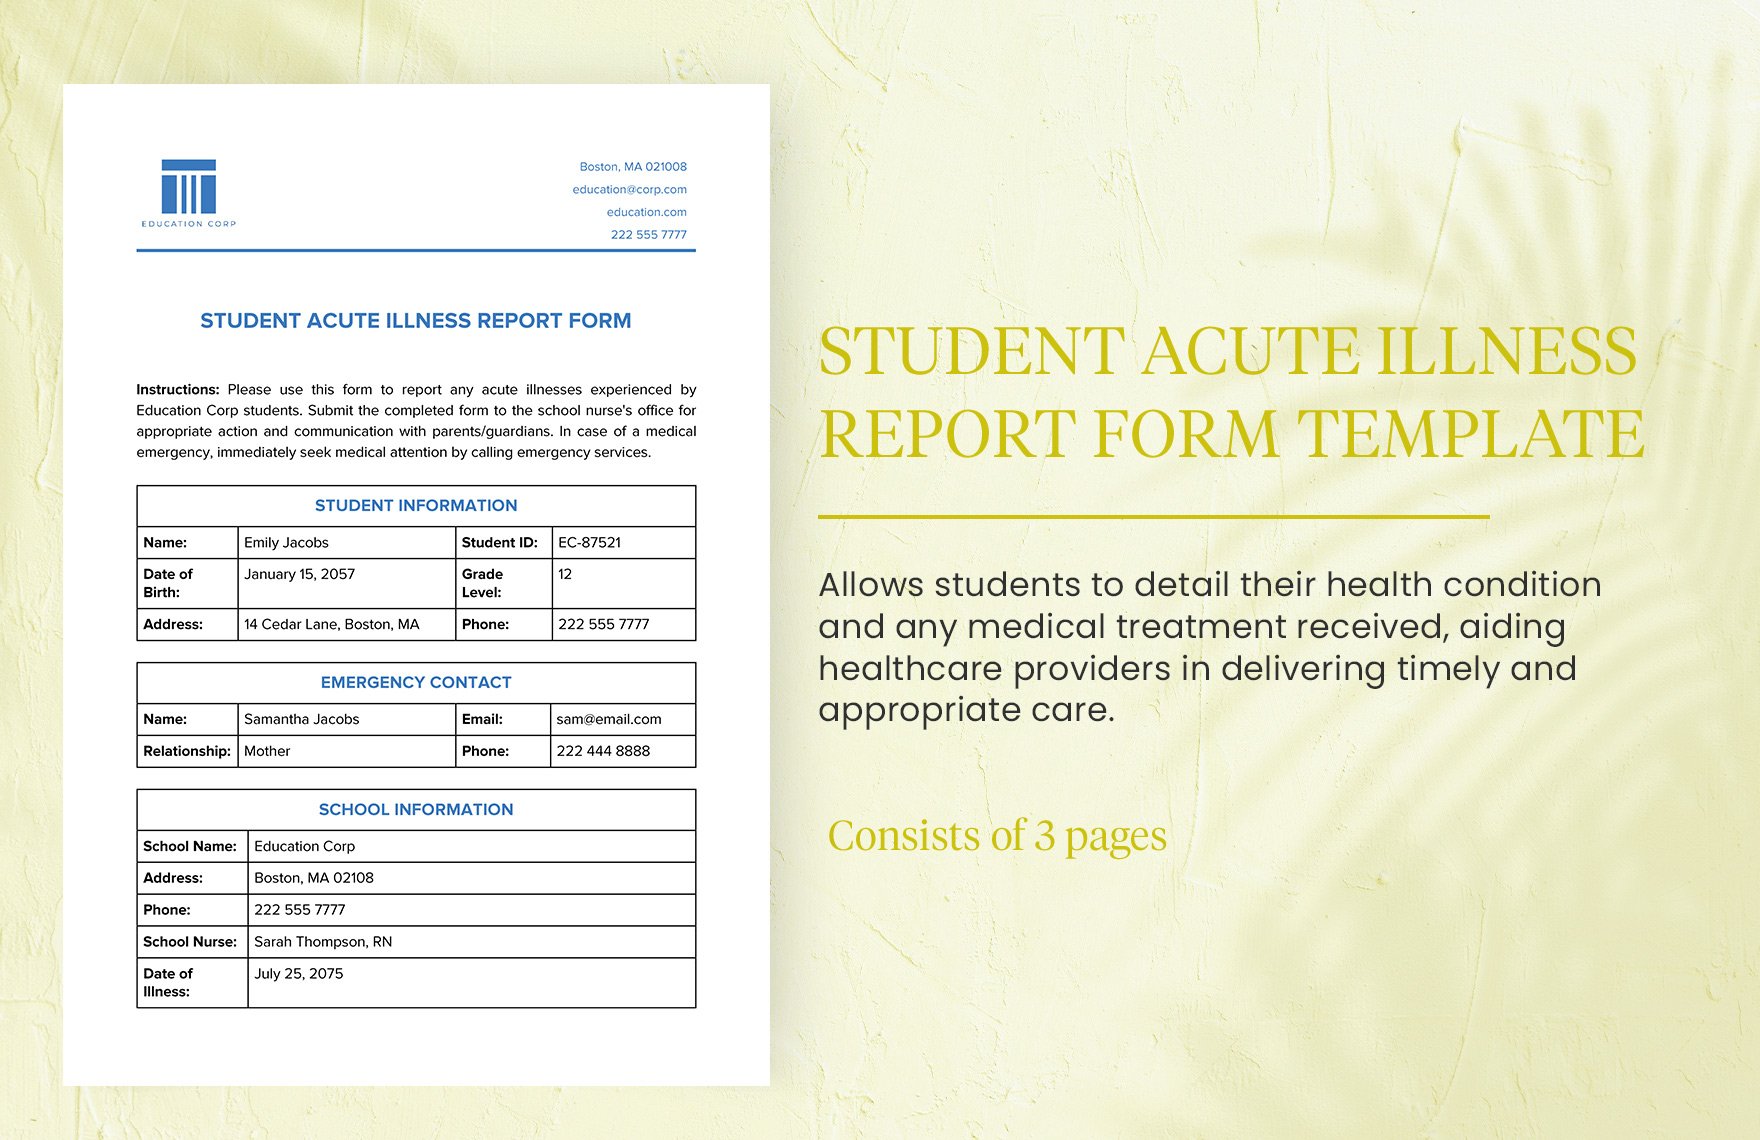 Student Acute Illness Report Form Template